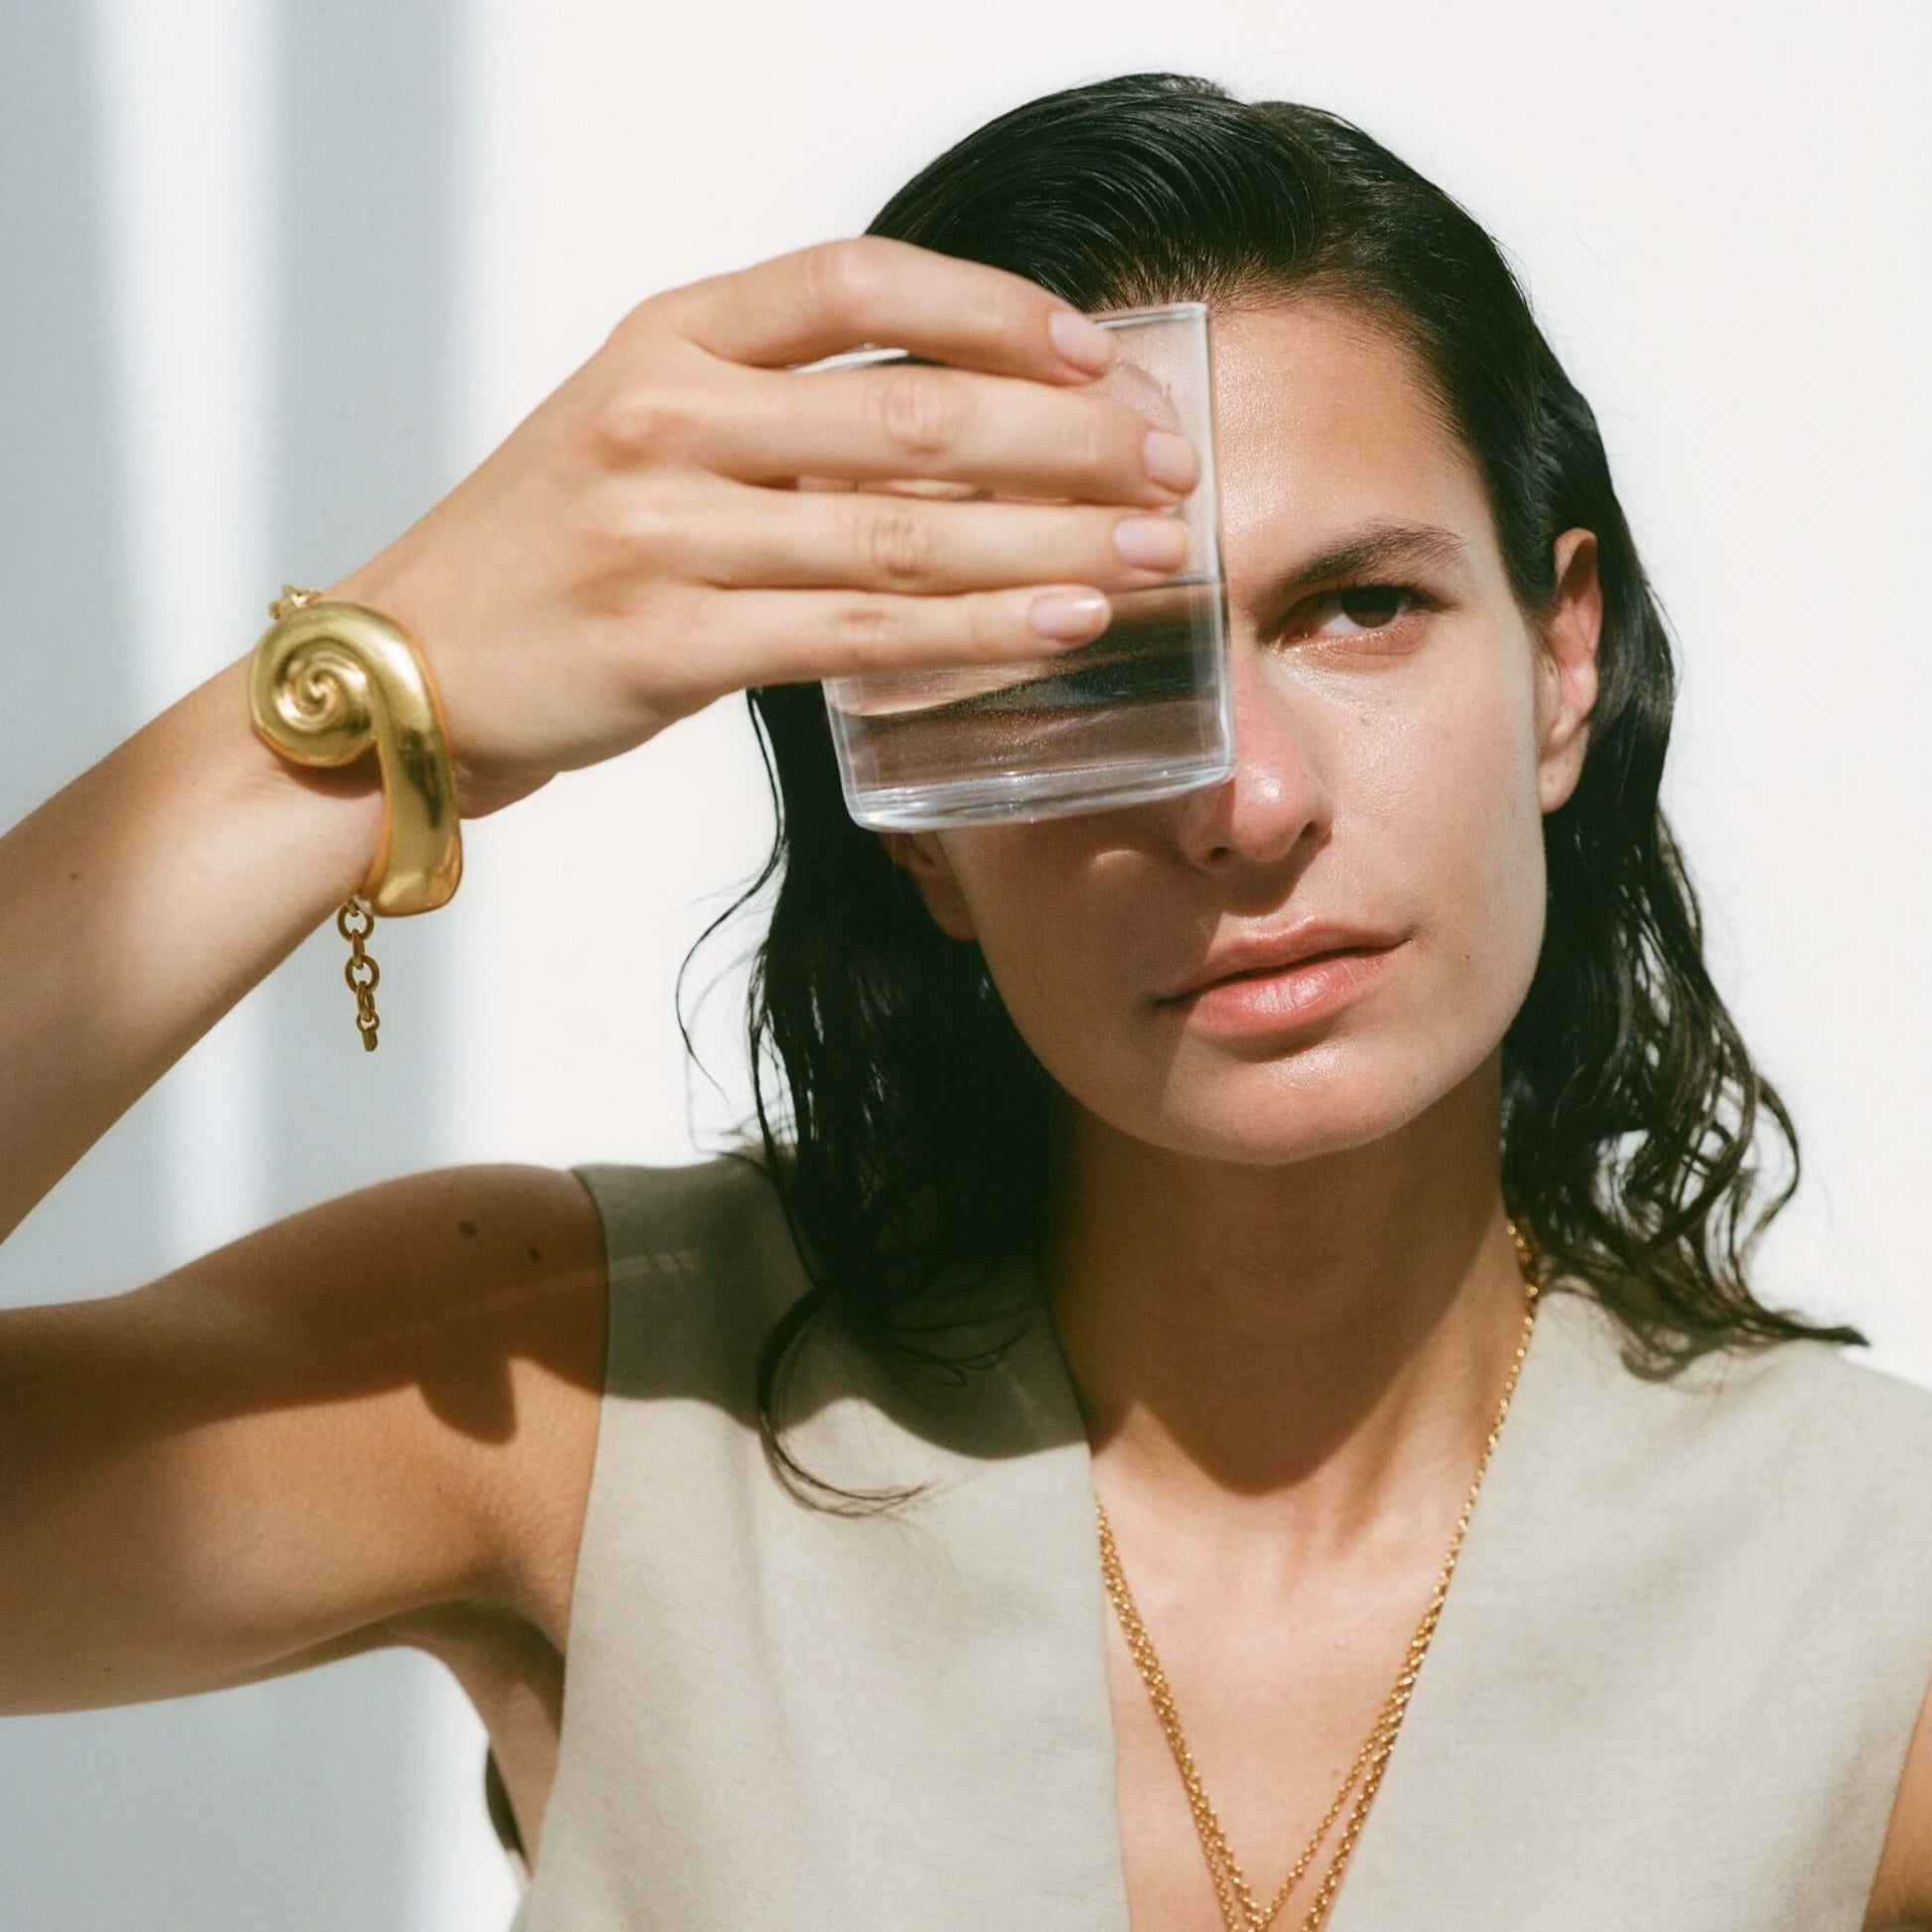 Model holding a glass of water in front of her eye, wearing a large, sculptural gold bracelet